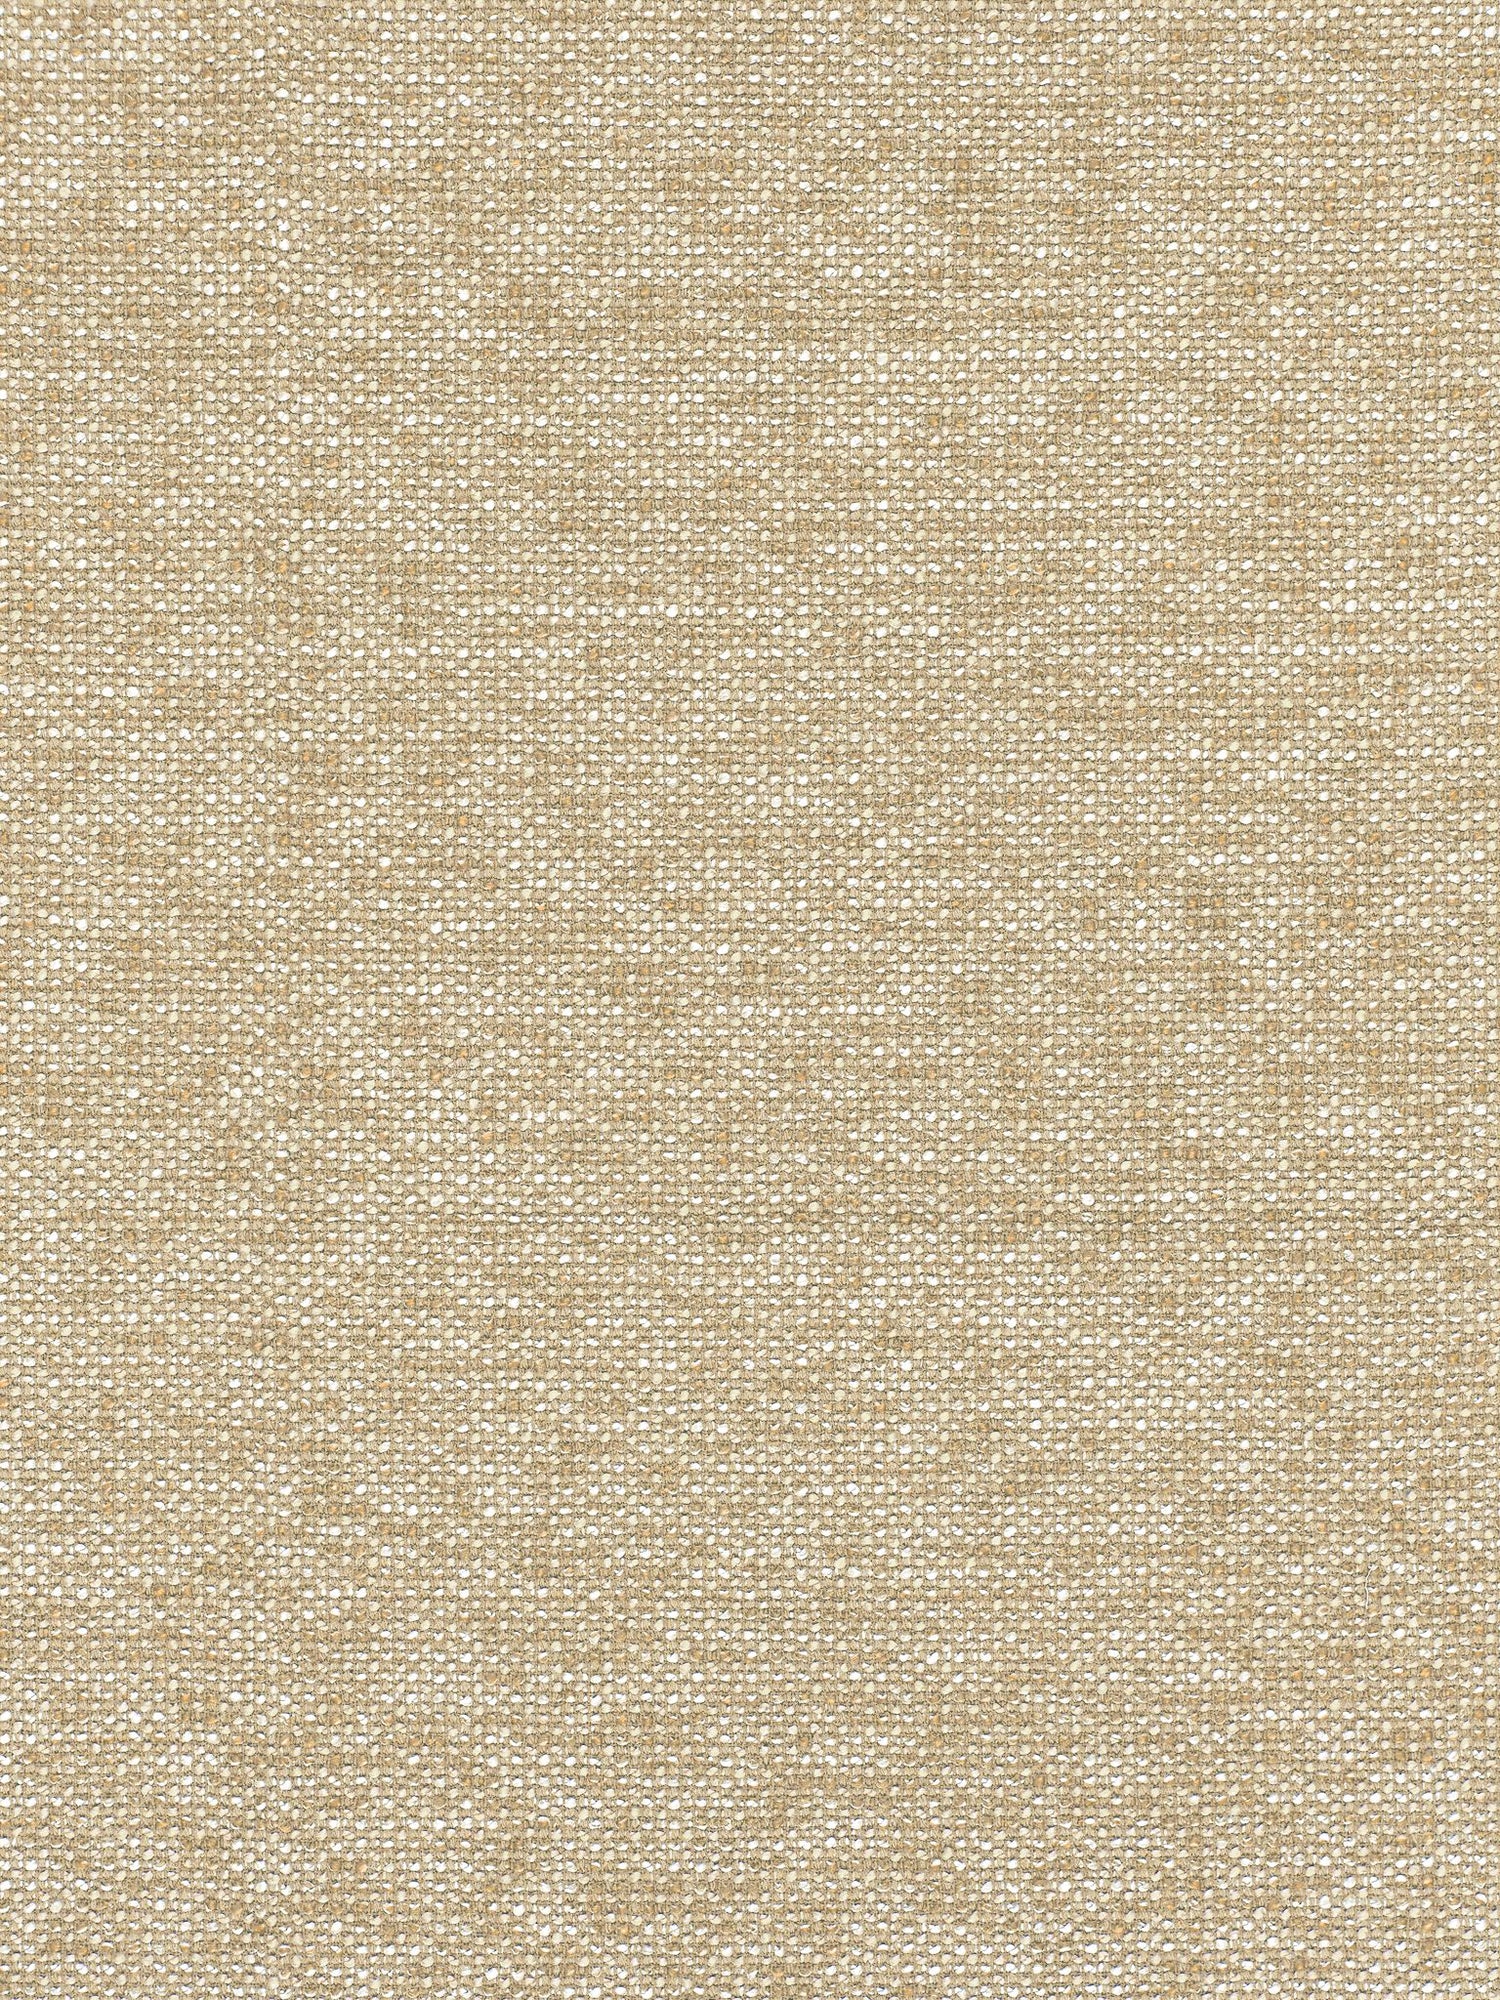 Torrs fabric in sand color - pattern number R7 00040588 - by Scalamandre in the Old World Weavers collection